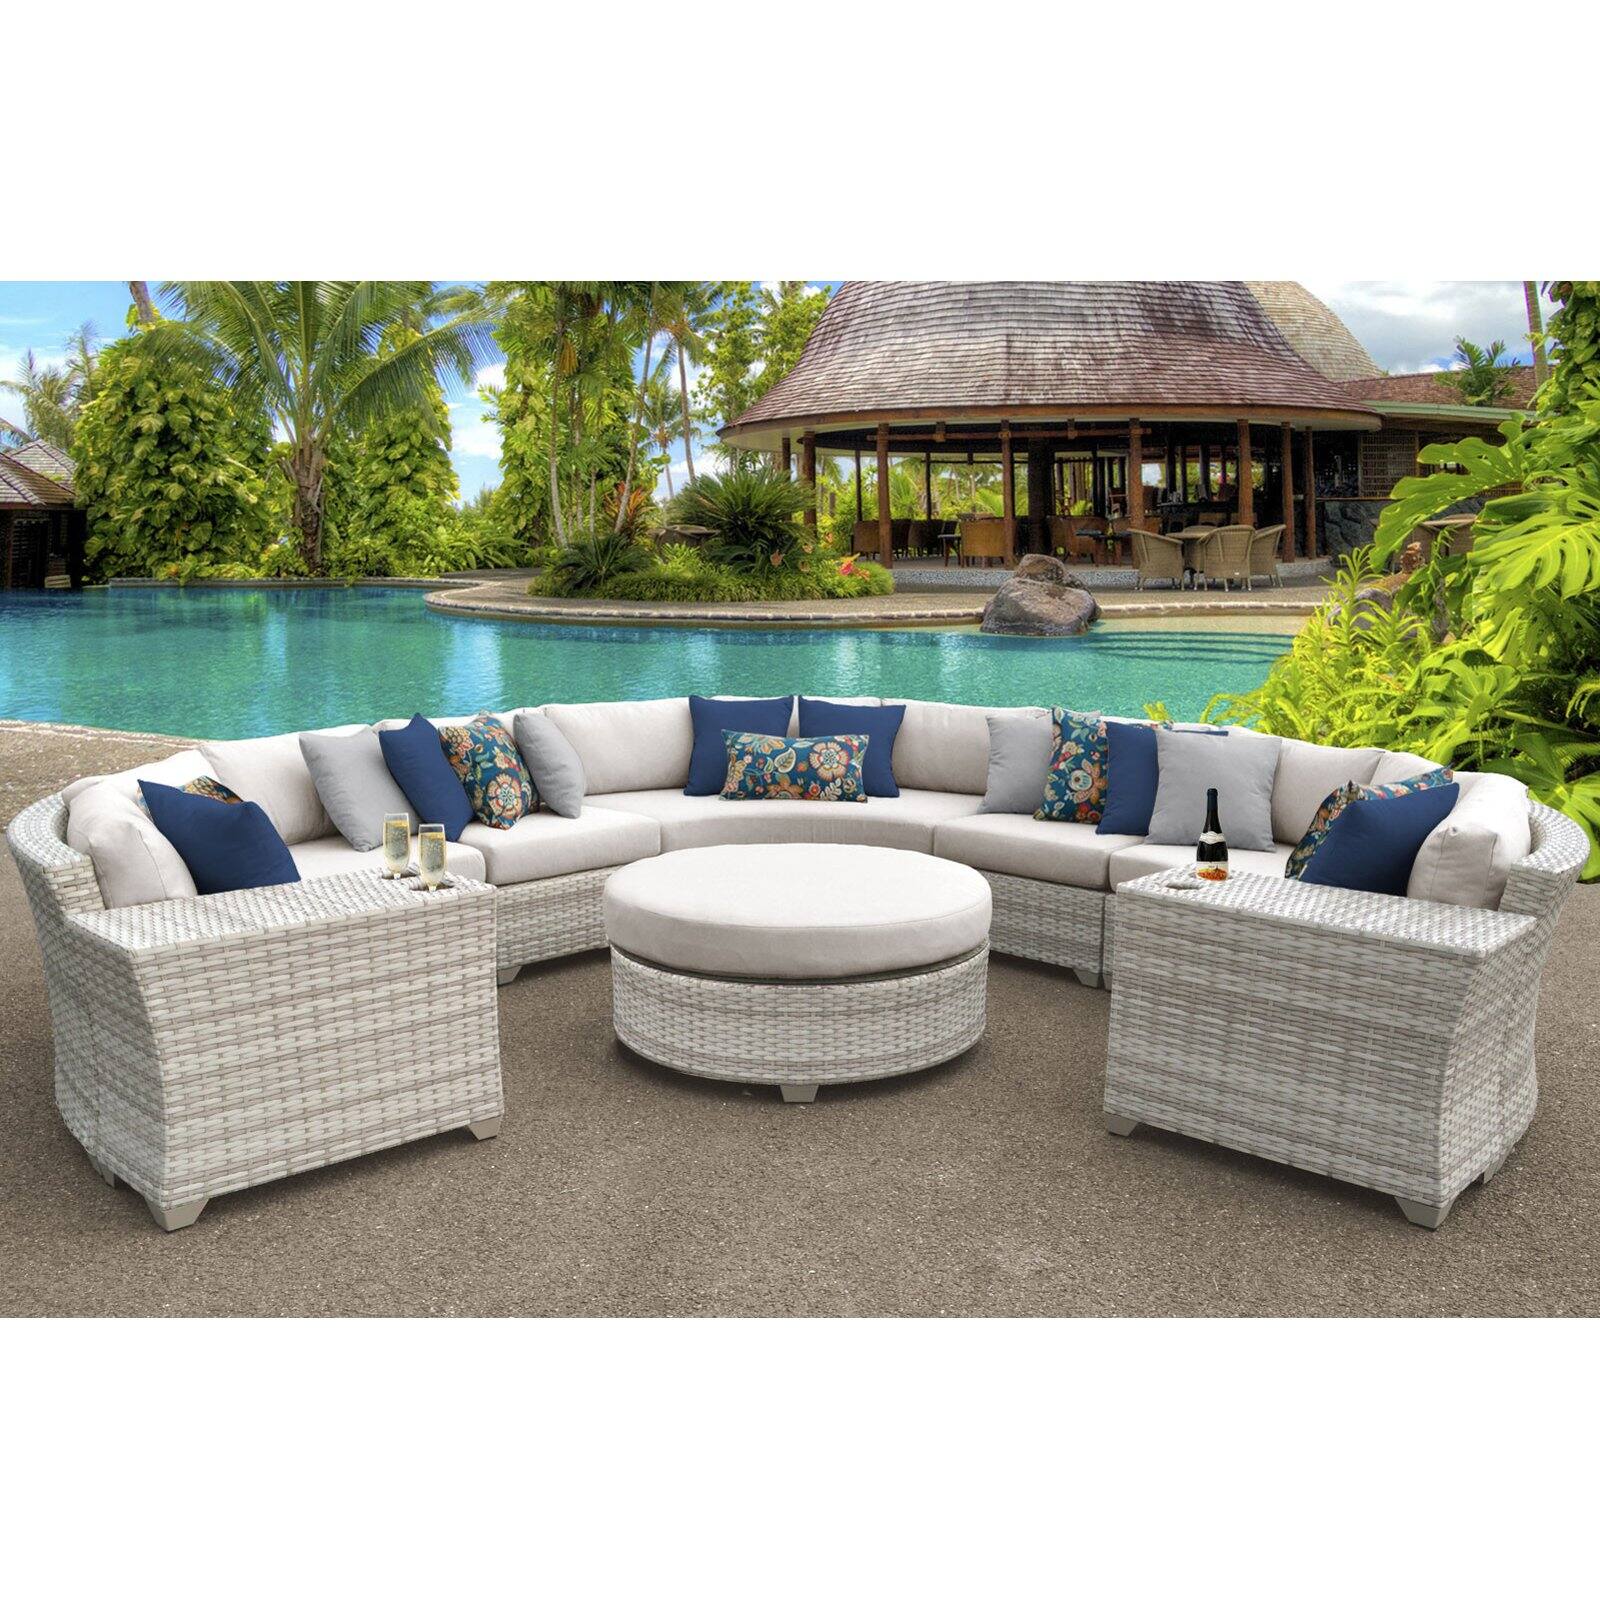 TK Classics Fairmont All-Weather Wicker 8 Piece Round Sectional Patio Conversation Set - image 1 of 2